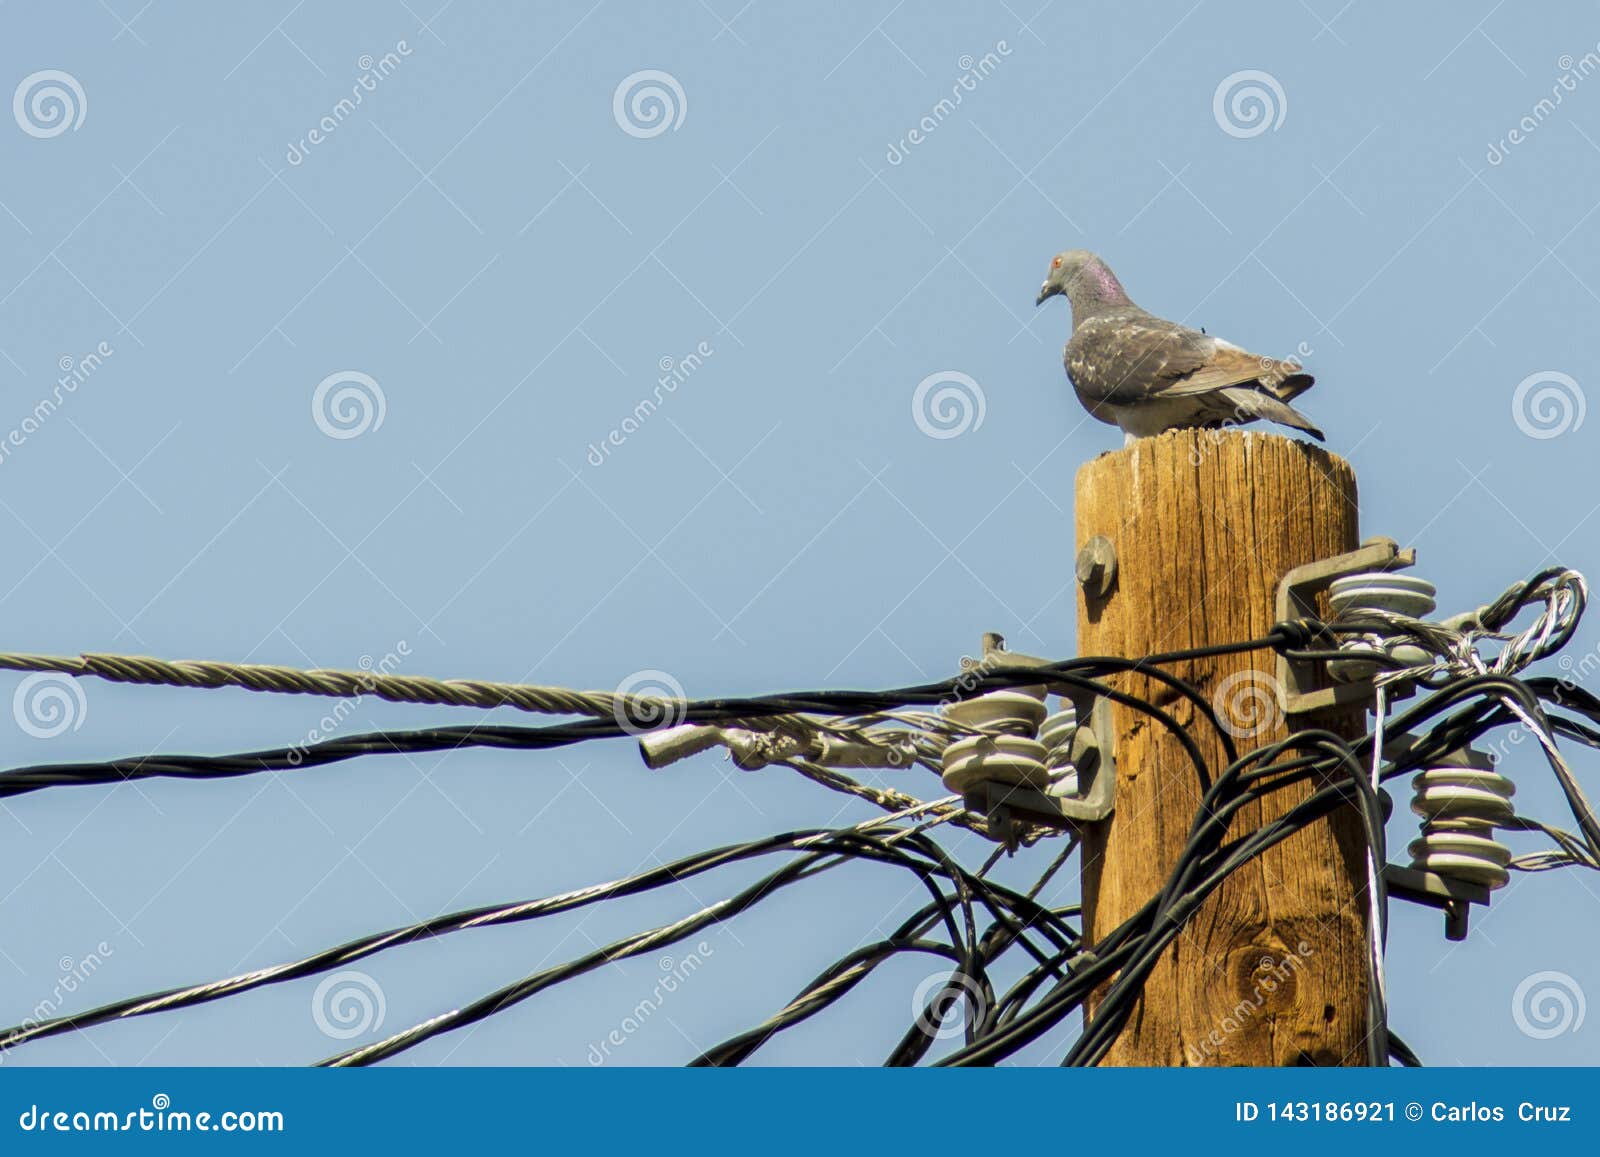 paloma pigeon is standing on the electric pillar